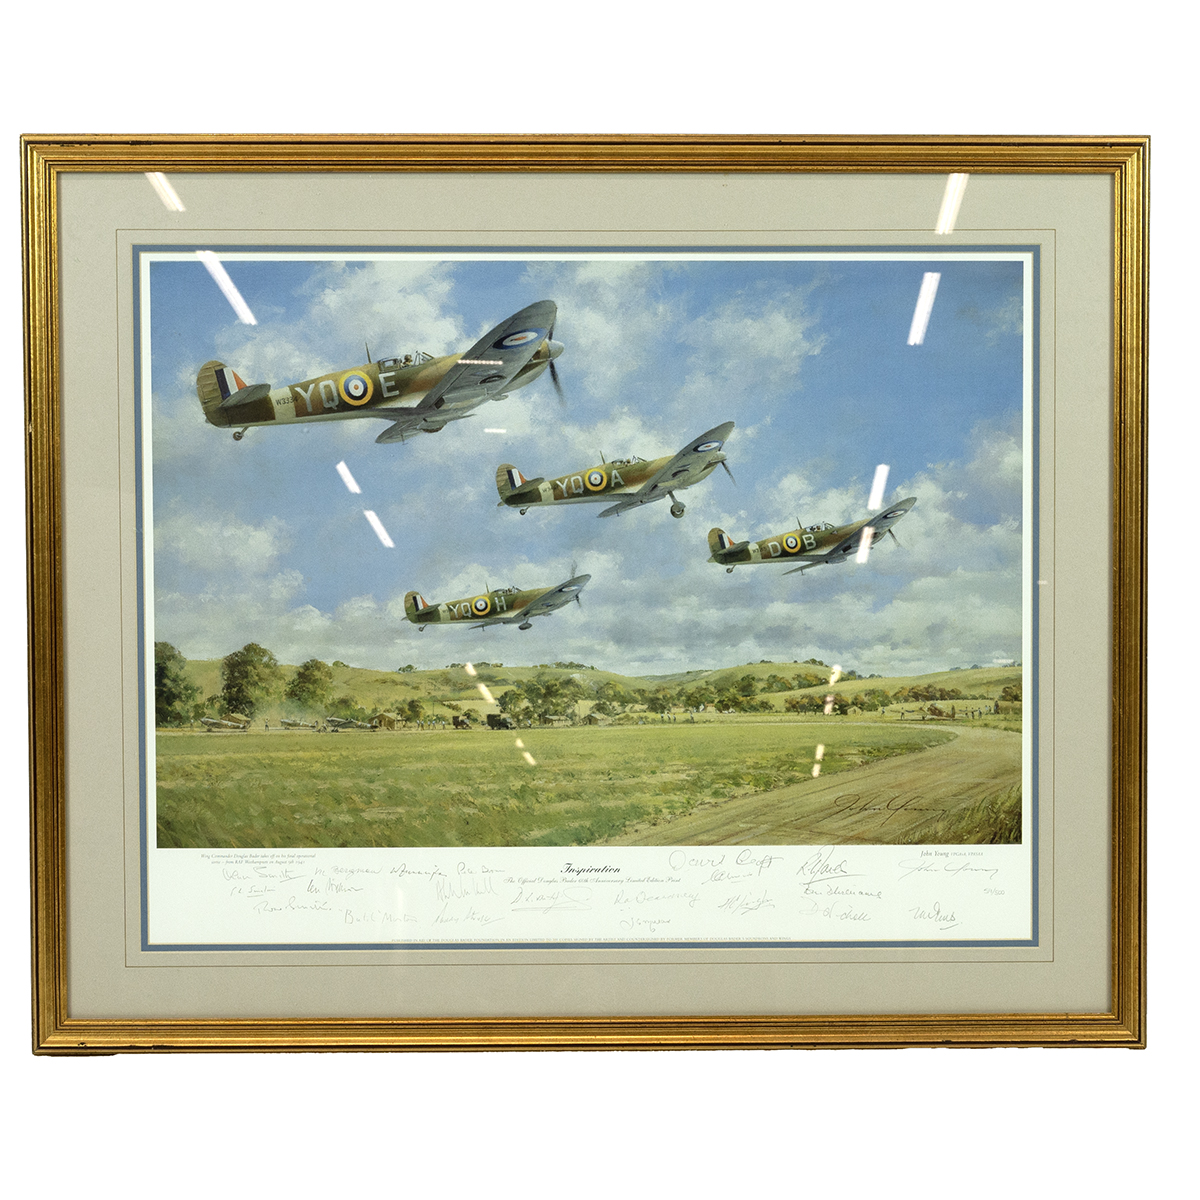 'Inspiration' Spitfire art print by John Young, 59/500, issued by The Official Douglas Bader Foun...